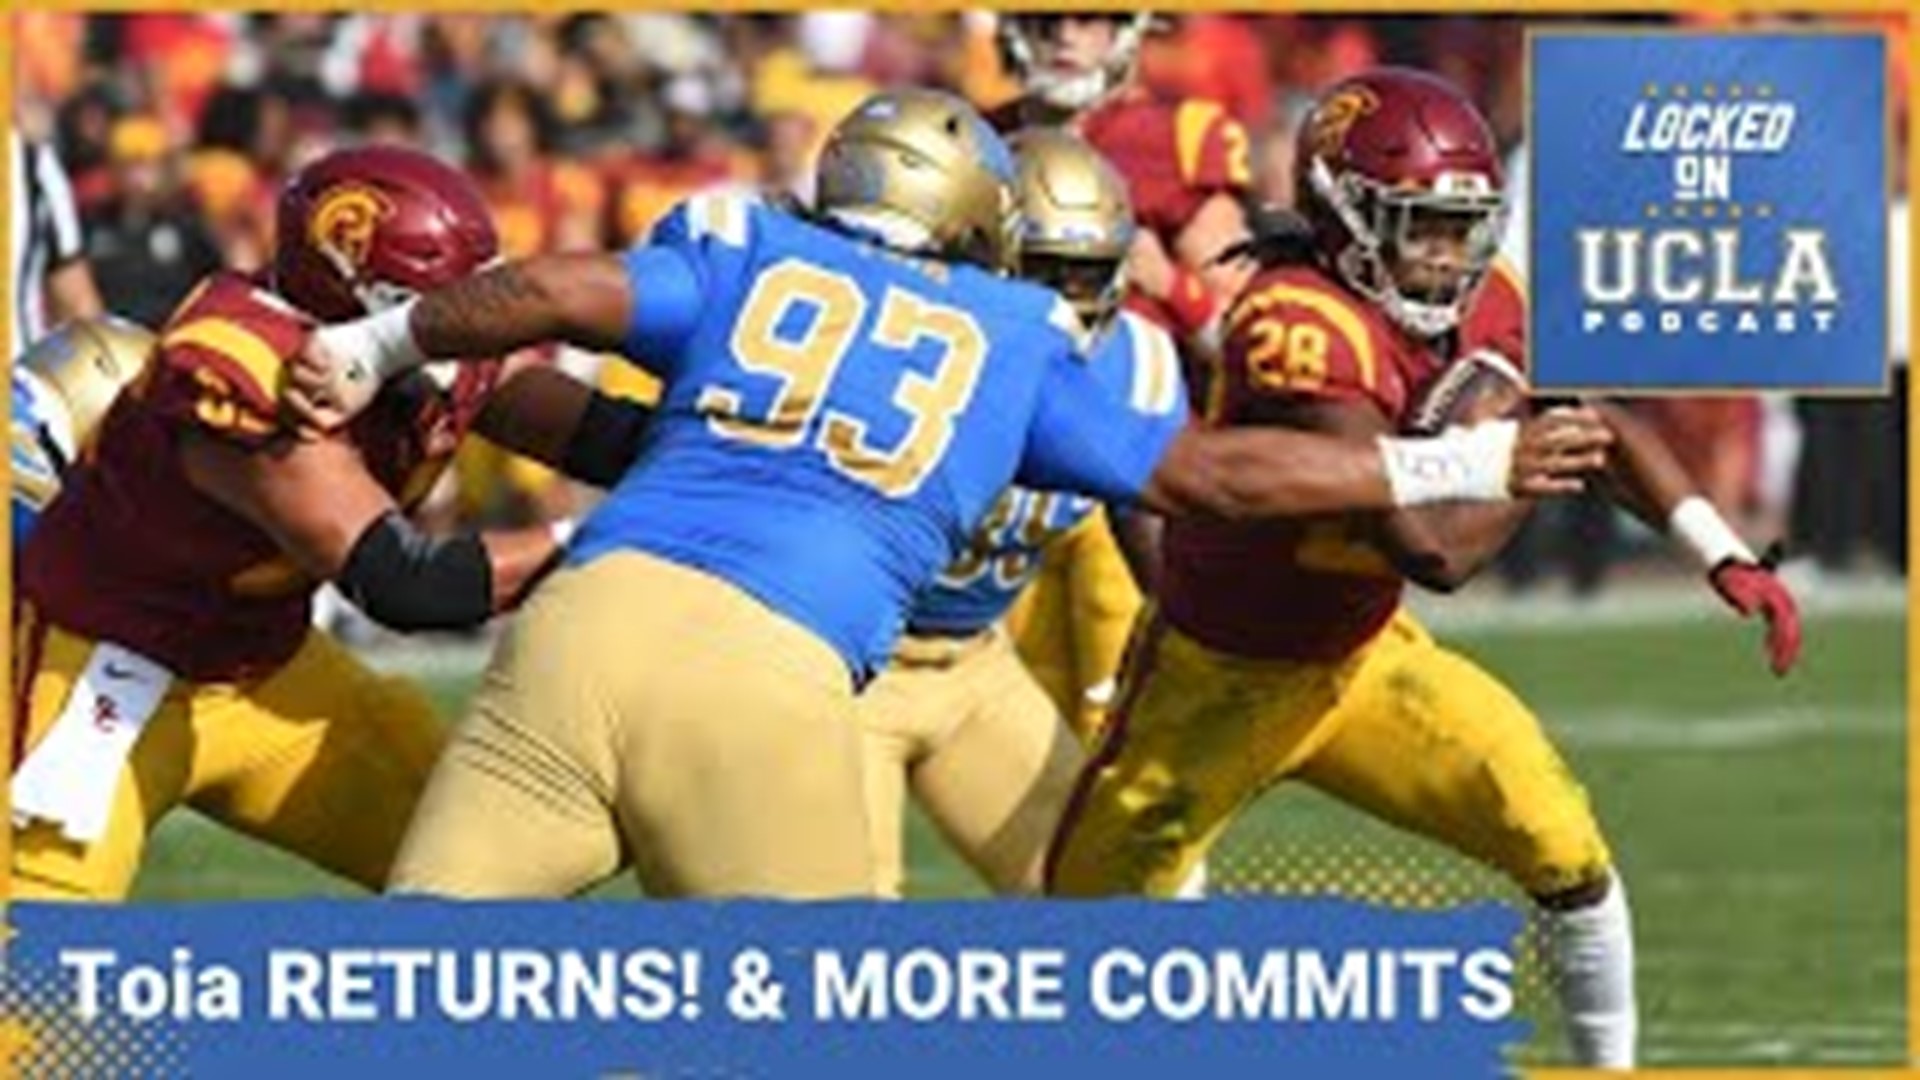 On this episode of Locked On UCLA, Zach Anderson-Yoxsimer discusses the significance of UCLA Football bringing back Jay Toia after he entered the transfer portal.